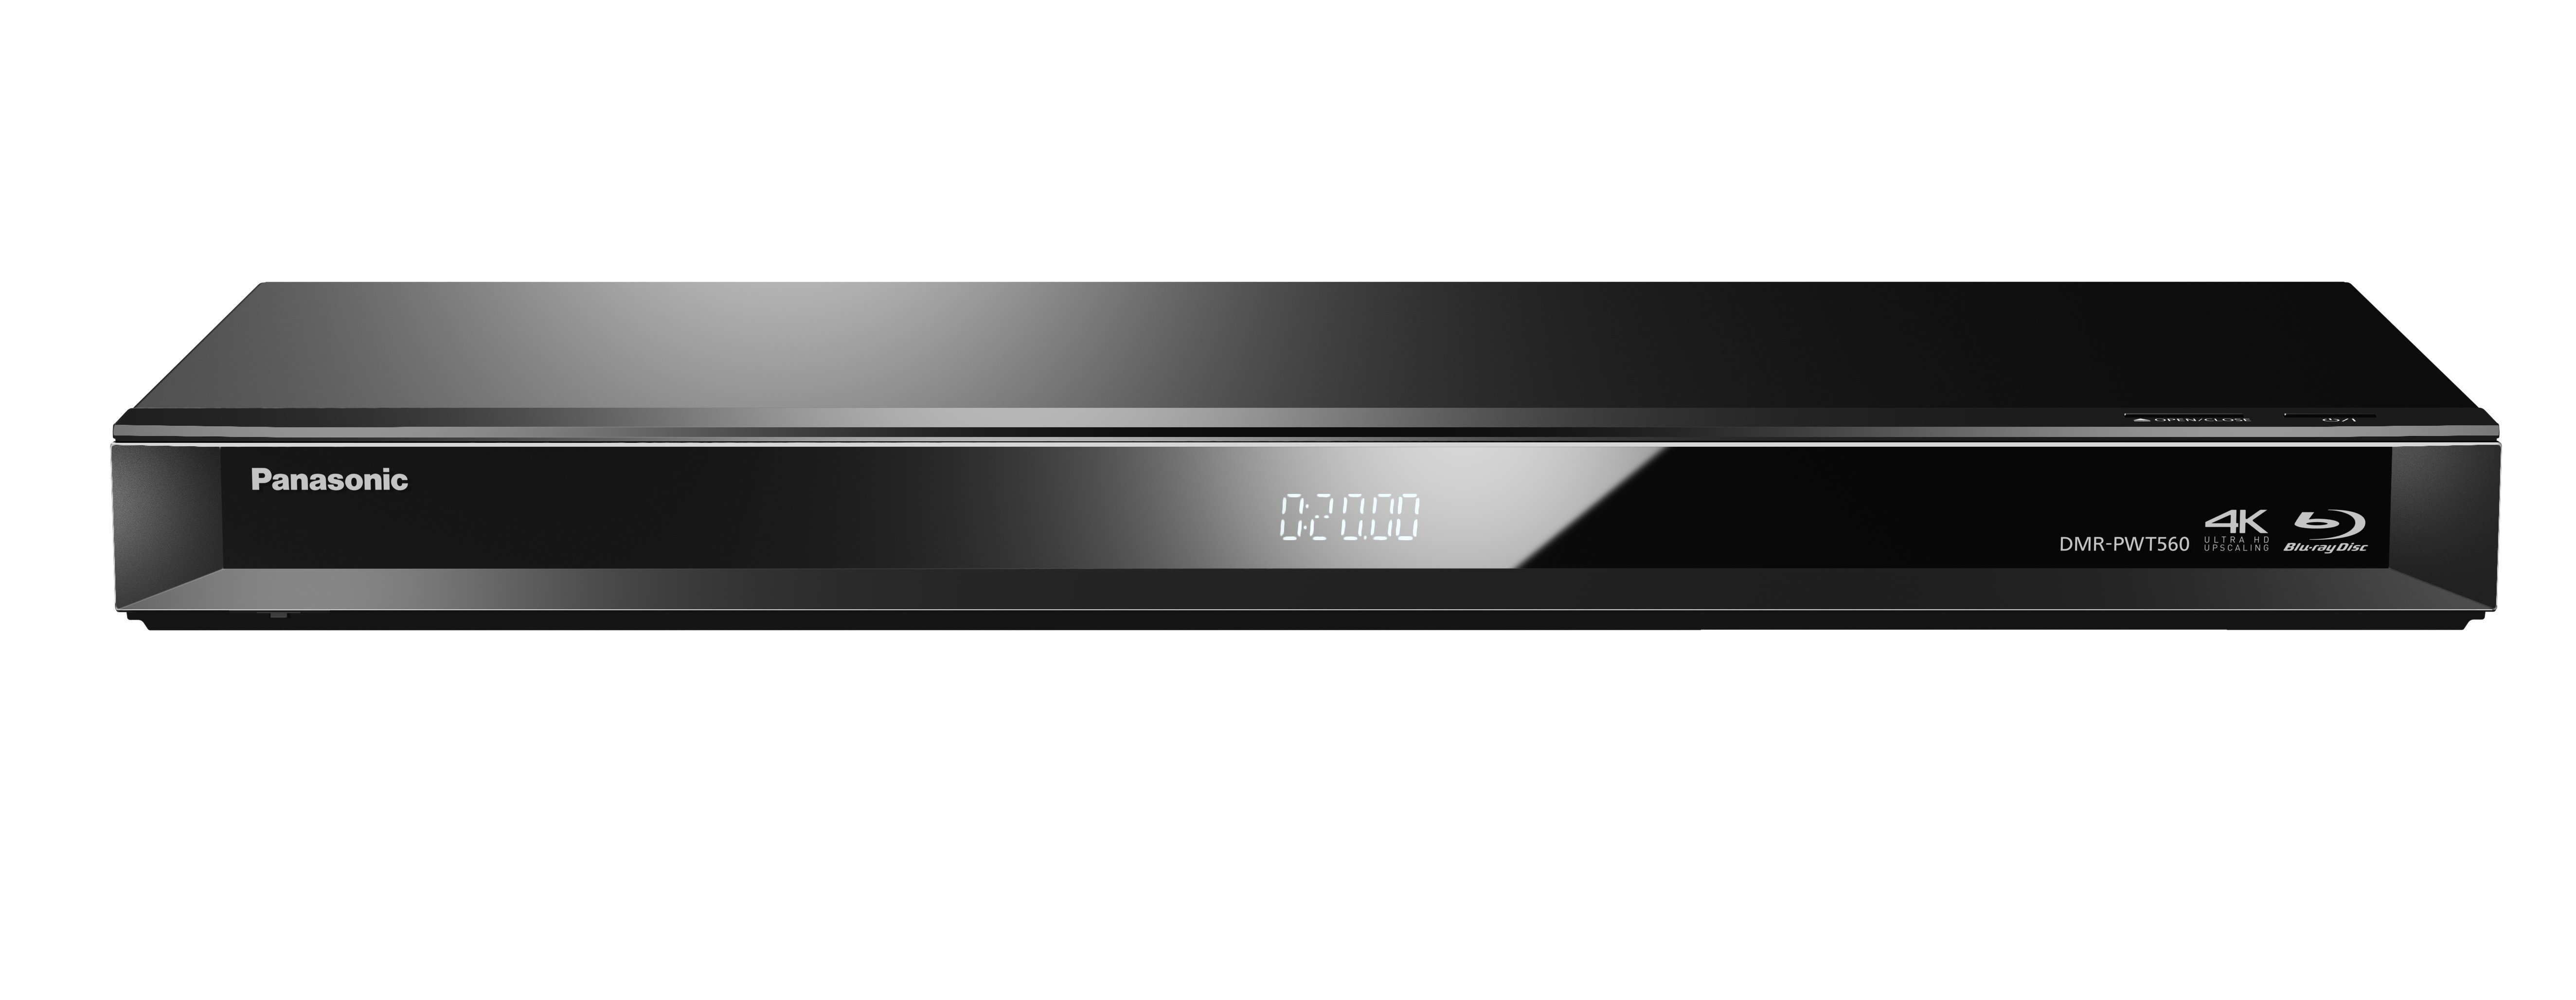 DMR-PWT560GN Smart Network 3D Blu-Ray and HDD Recorder | Appliances Online